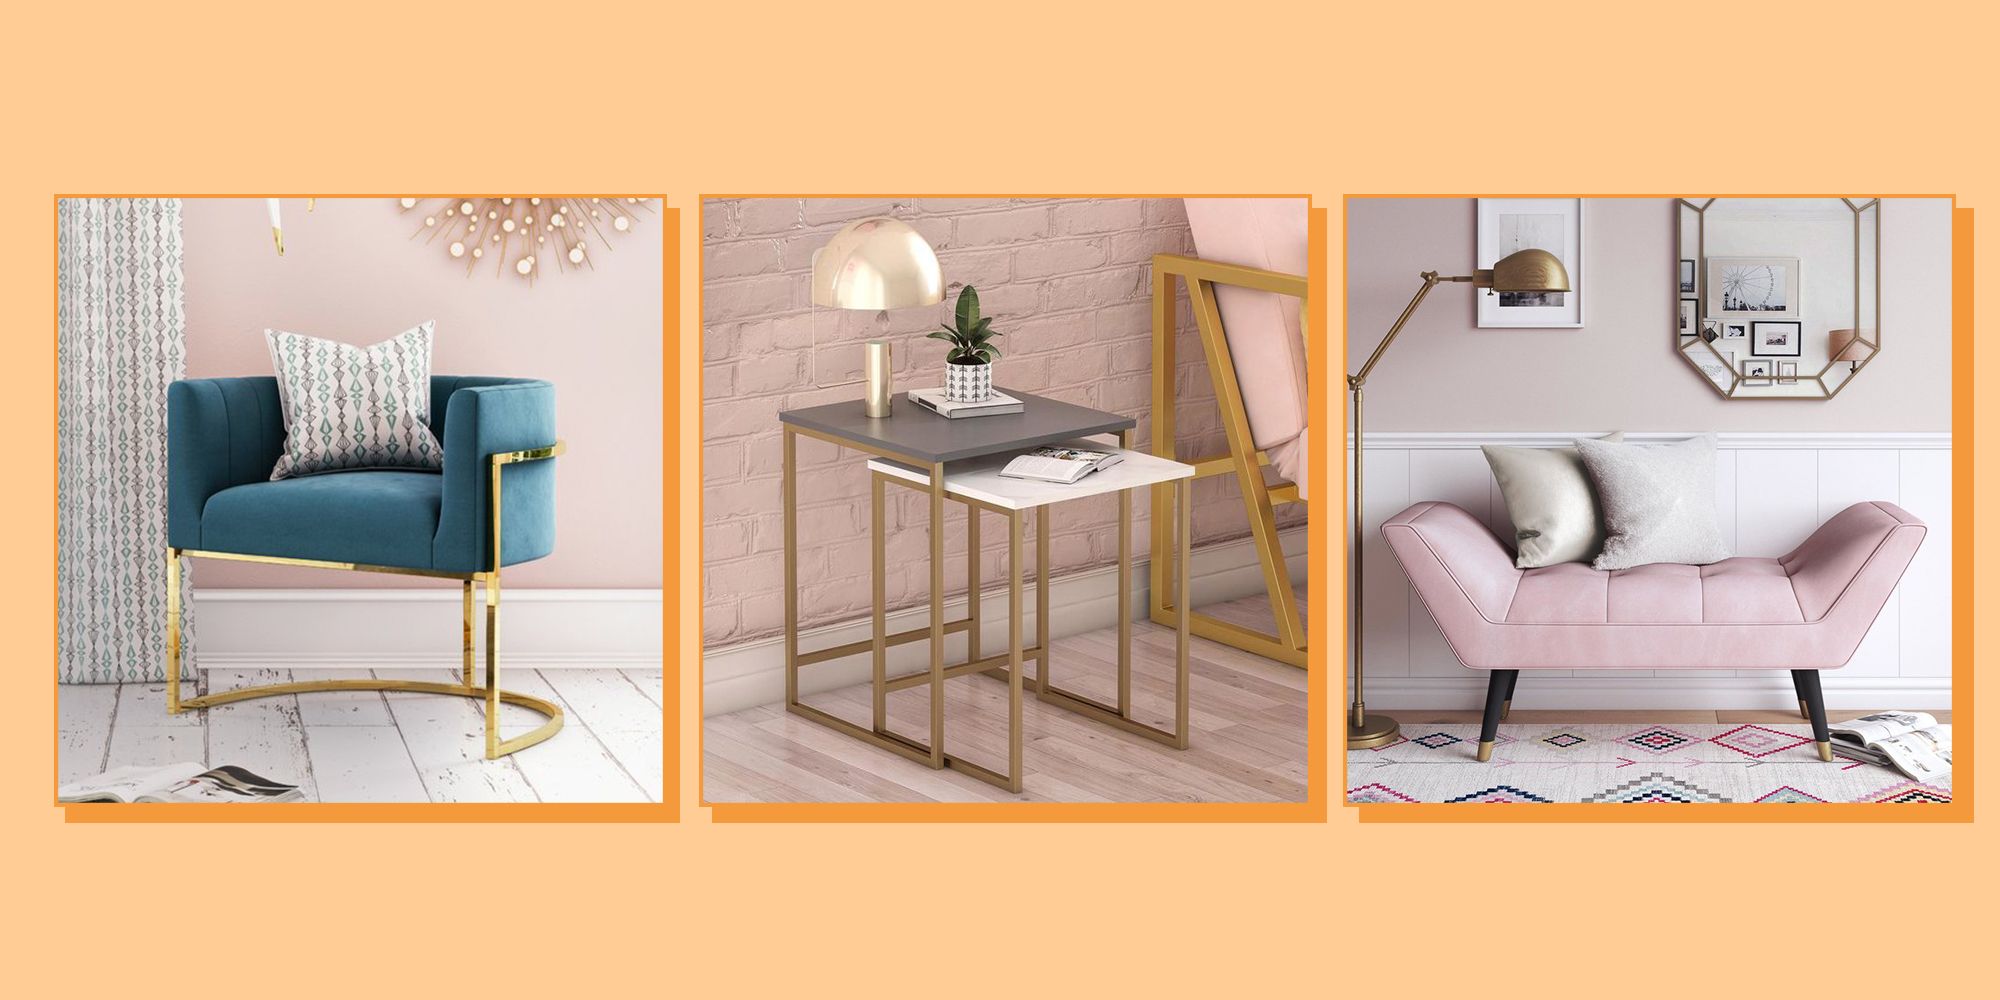 10 Items from Cosmo's Chic New Home Line That Are Perfect for Your